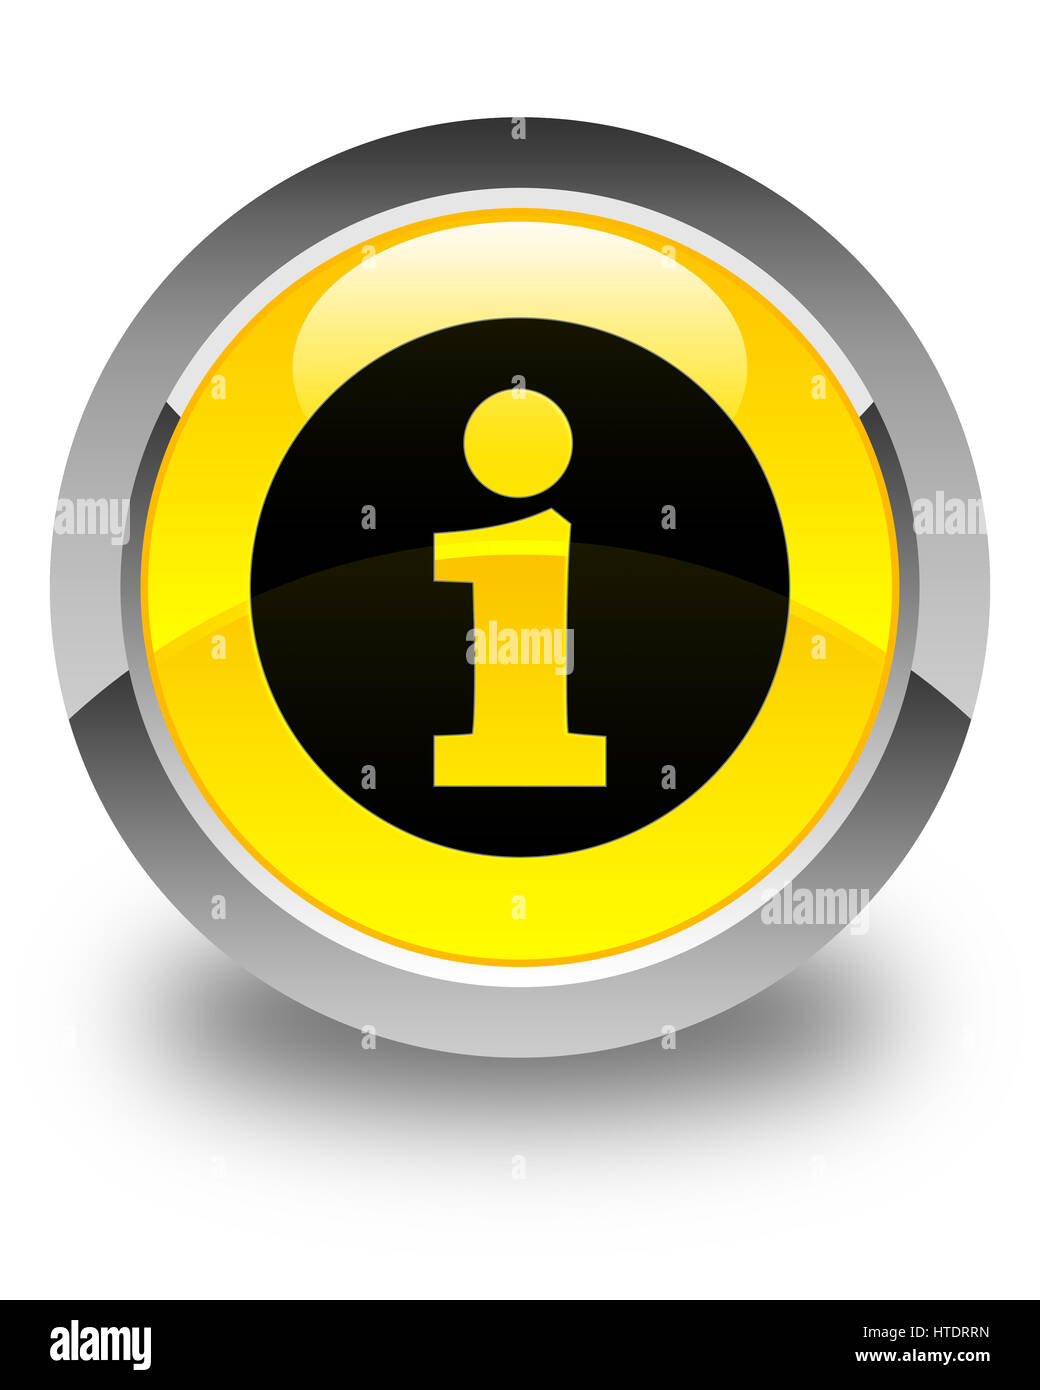 Info icon isolated on glossy yellow round button abstract illustration Stock Photo